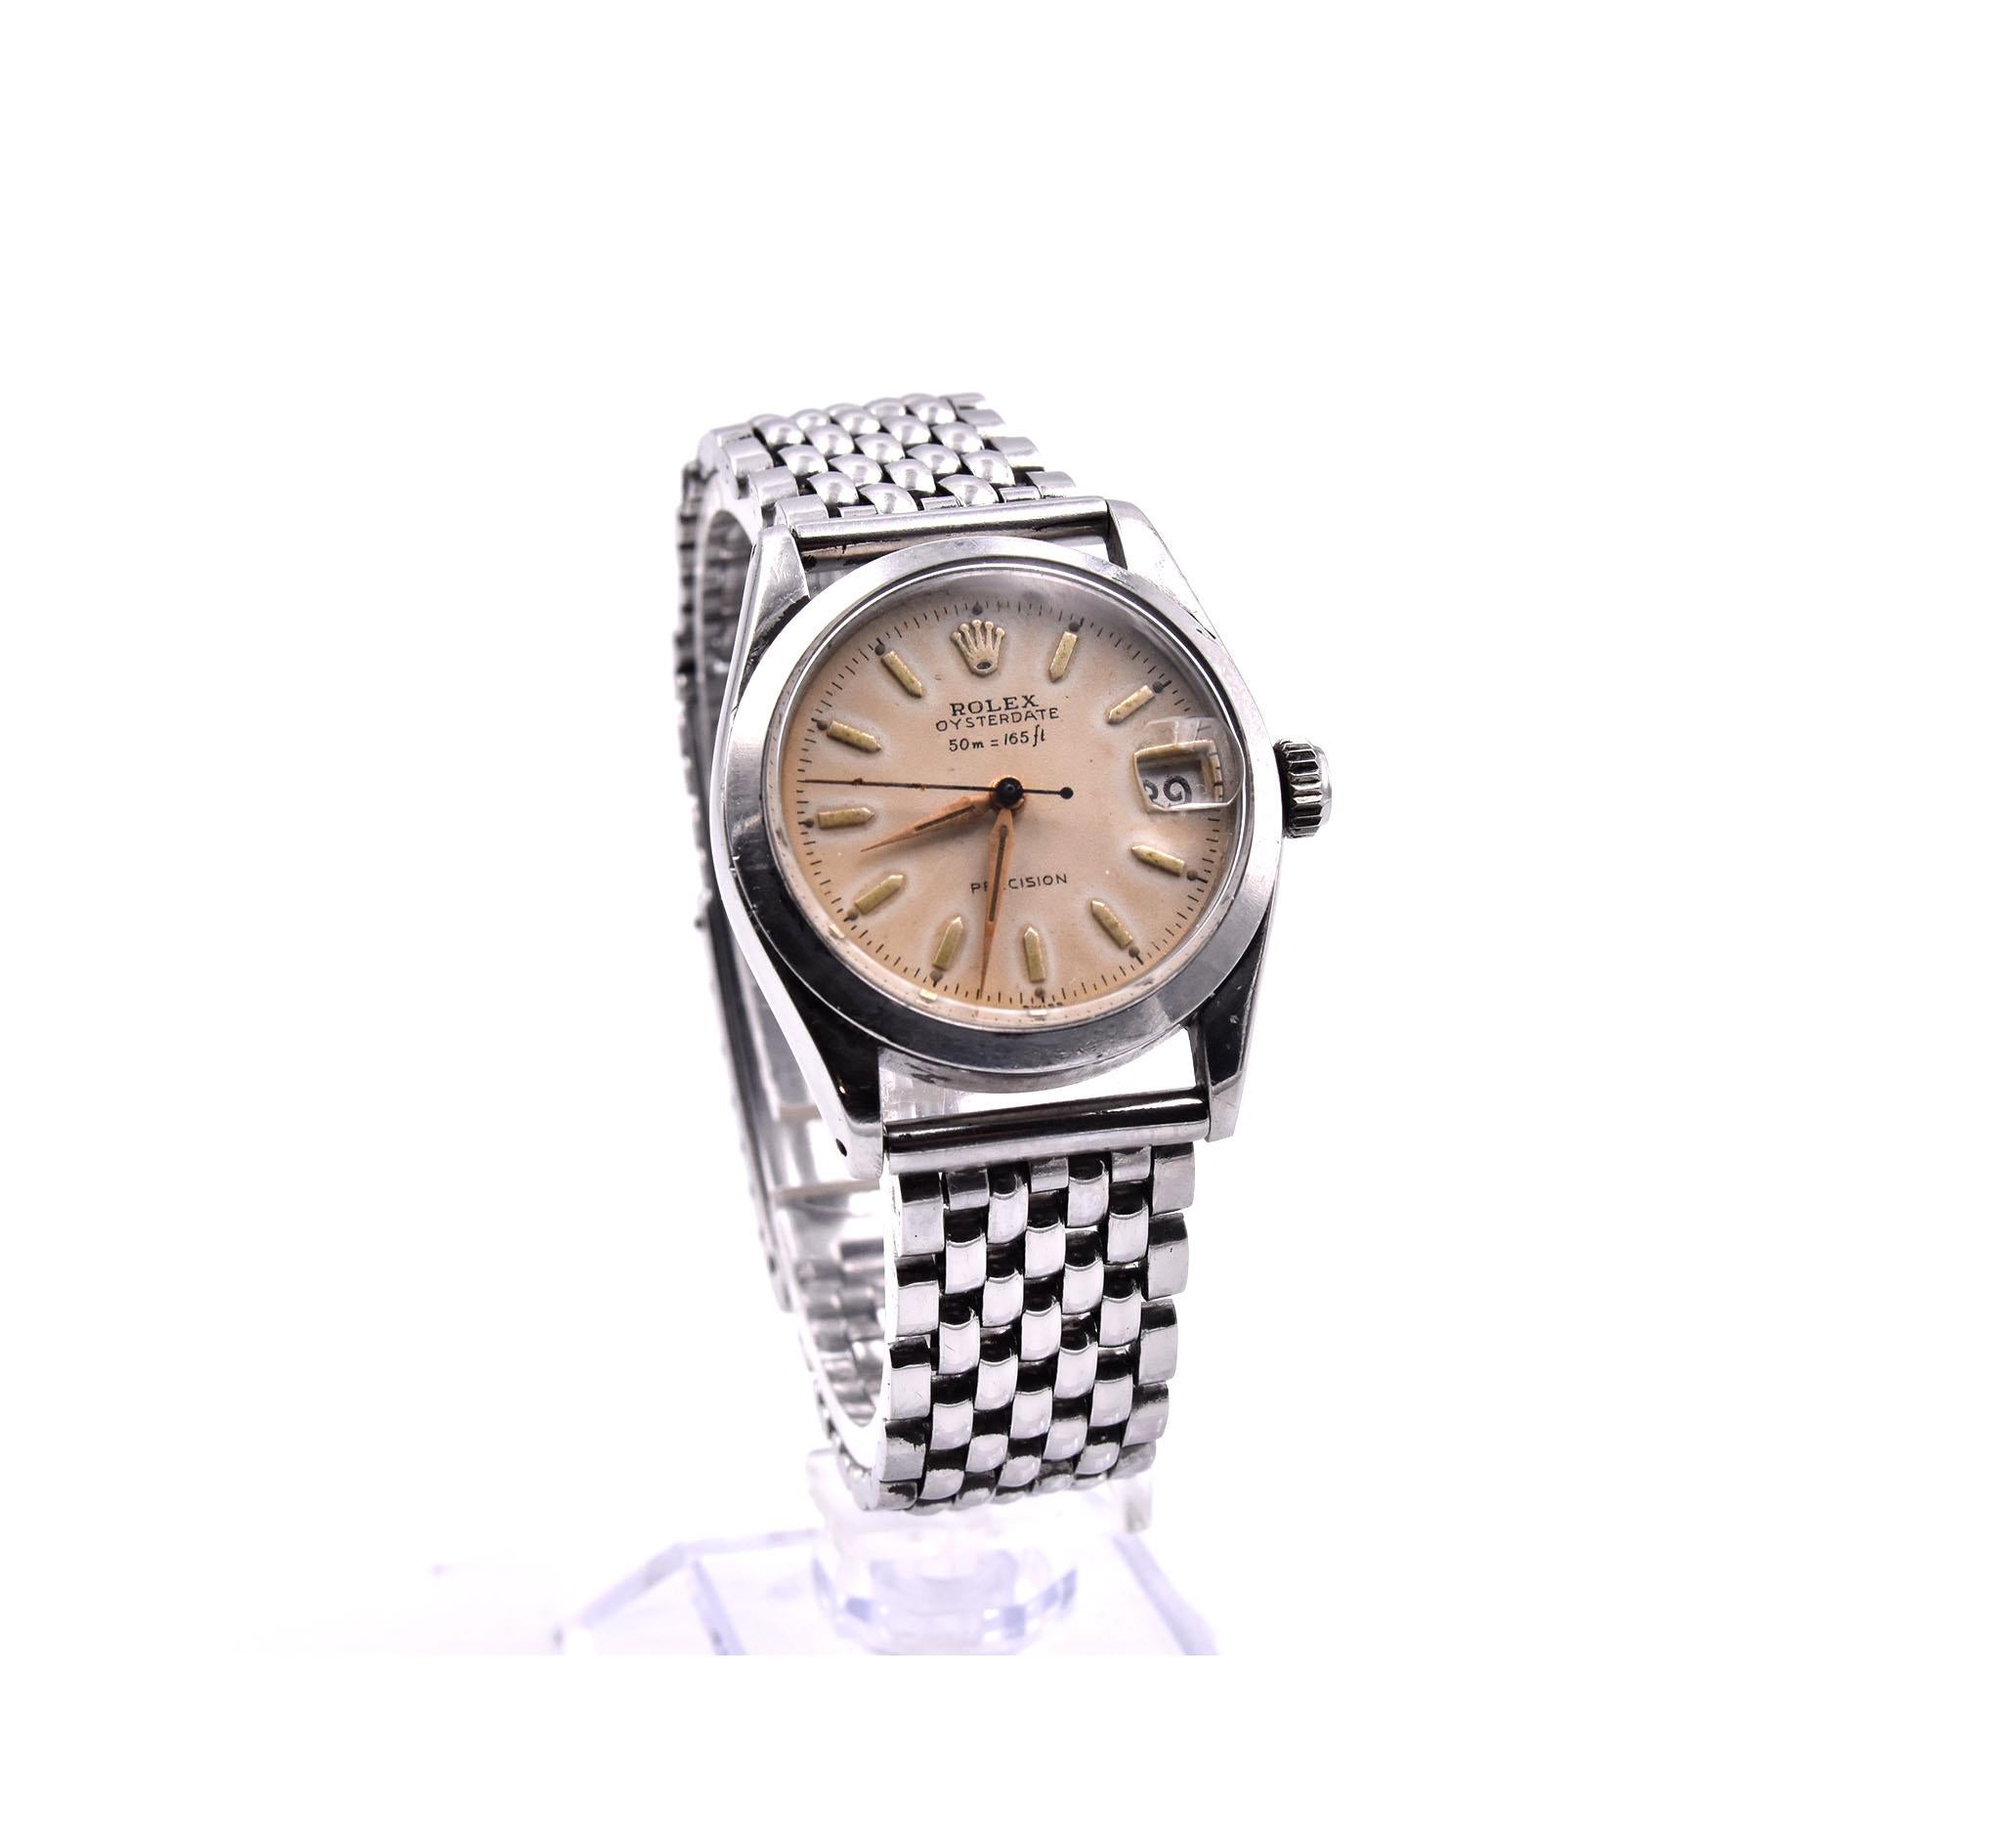 Movement: Manual Wind
Function: hours, minutes, seconds, date
Case: 31mm round stainless-steel case
Dial: Champagne Dial with yellow gold stick markers
Band: stainless steel factory rice grain bracelet
Serial #: 65XXX
Reference #: 6466

No Box or